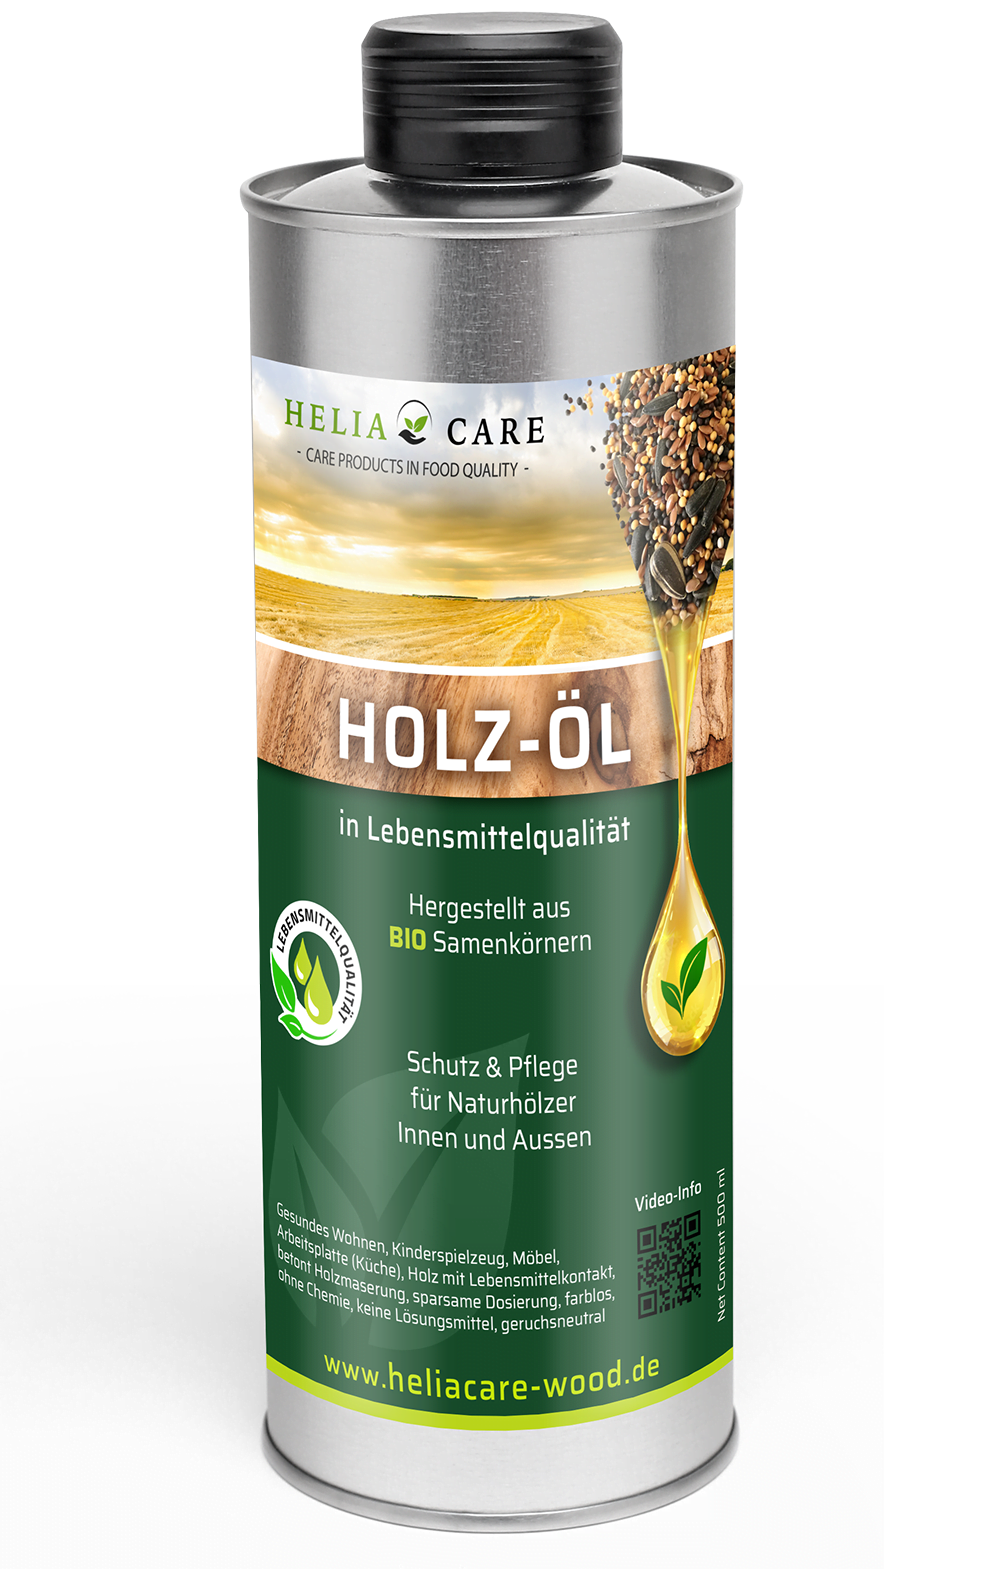 Wood oil from HeliaCARE for wood protection without chemicals, completely natural